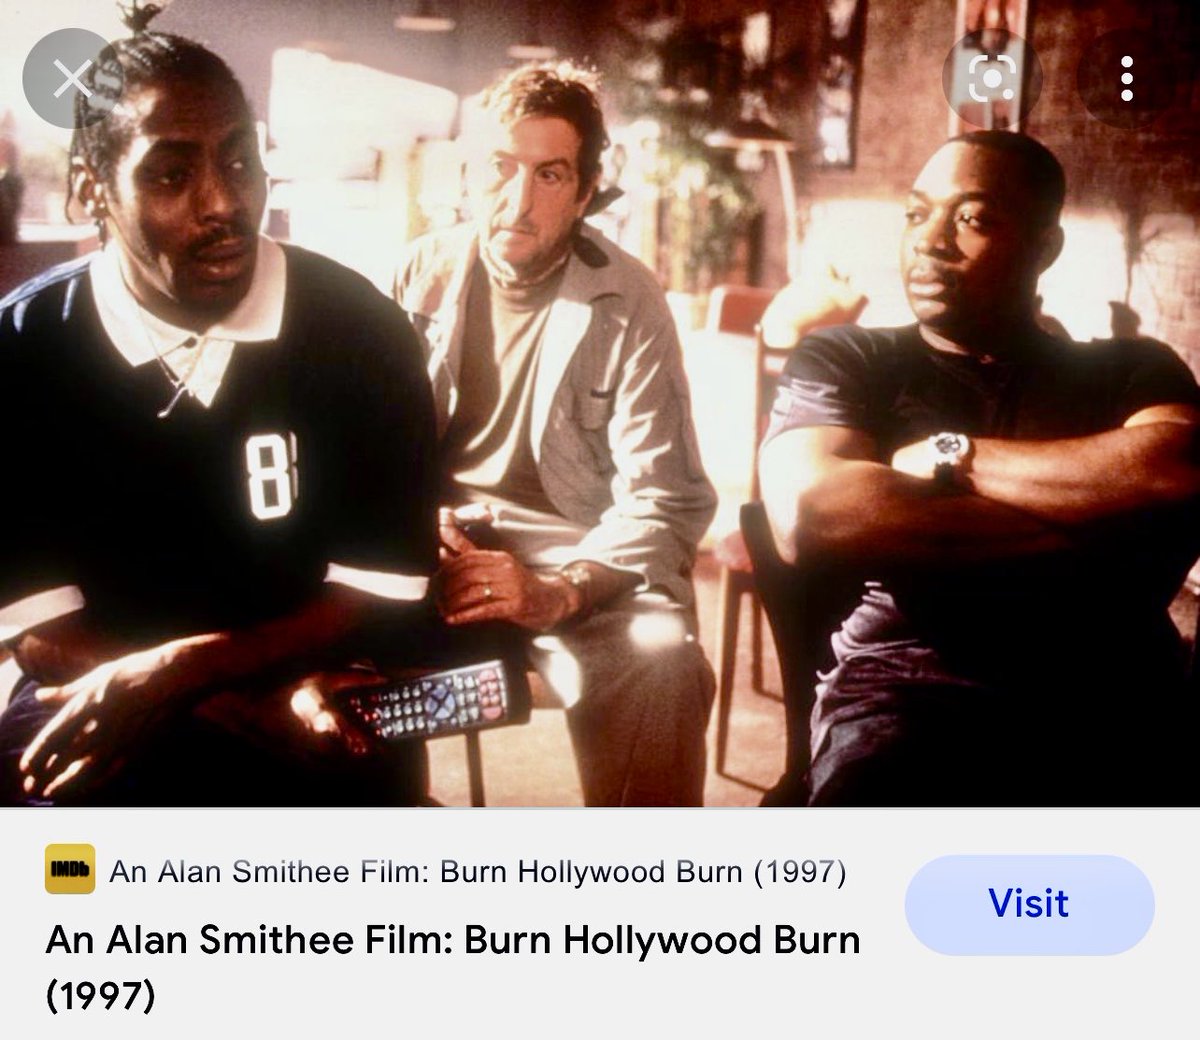 Also born on Aug 1st …Coolio was a ⁦@hiphopgods⁩ MC from LowProfile on up. We did a parody film Burn Hollywood Burn 1997 where I threw in acting because we sought the score & soundtrack. We were called the Brothers ⁦@Coolio⁩ had plenty funny real stories #RestInBeats